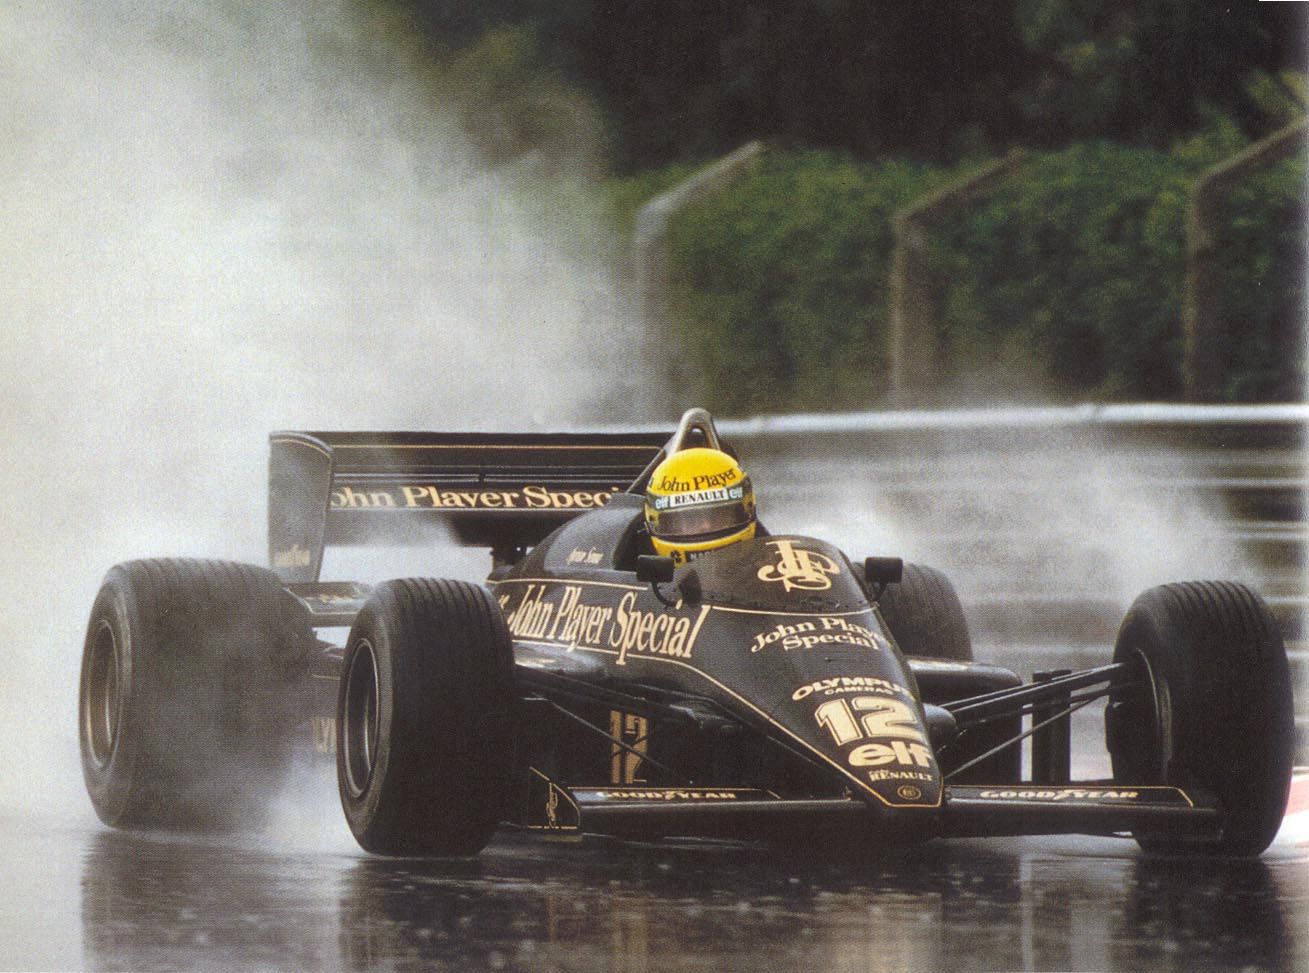 Ayrton Senna, Lotus 97T, on his way to his first victory in F1 at the Portuguese Grand Prix in Estoril on 21 April 1985.